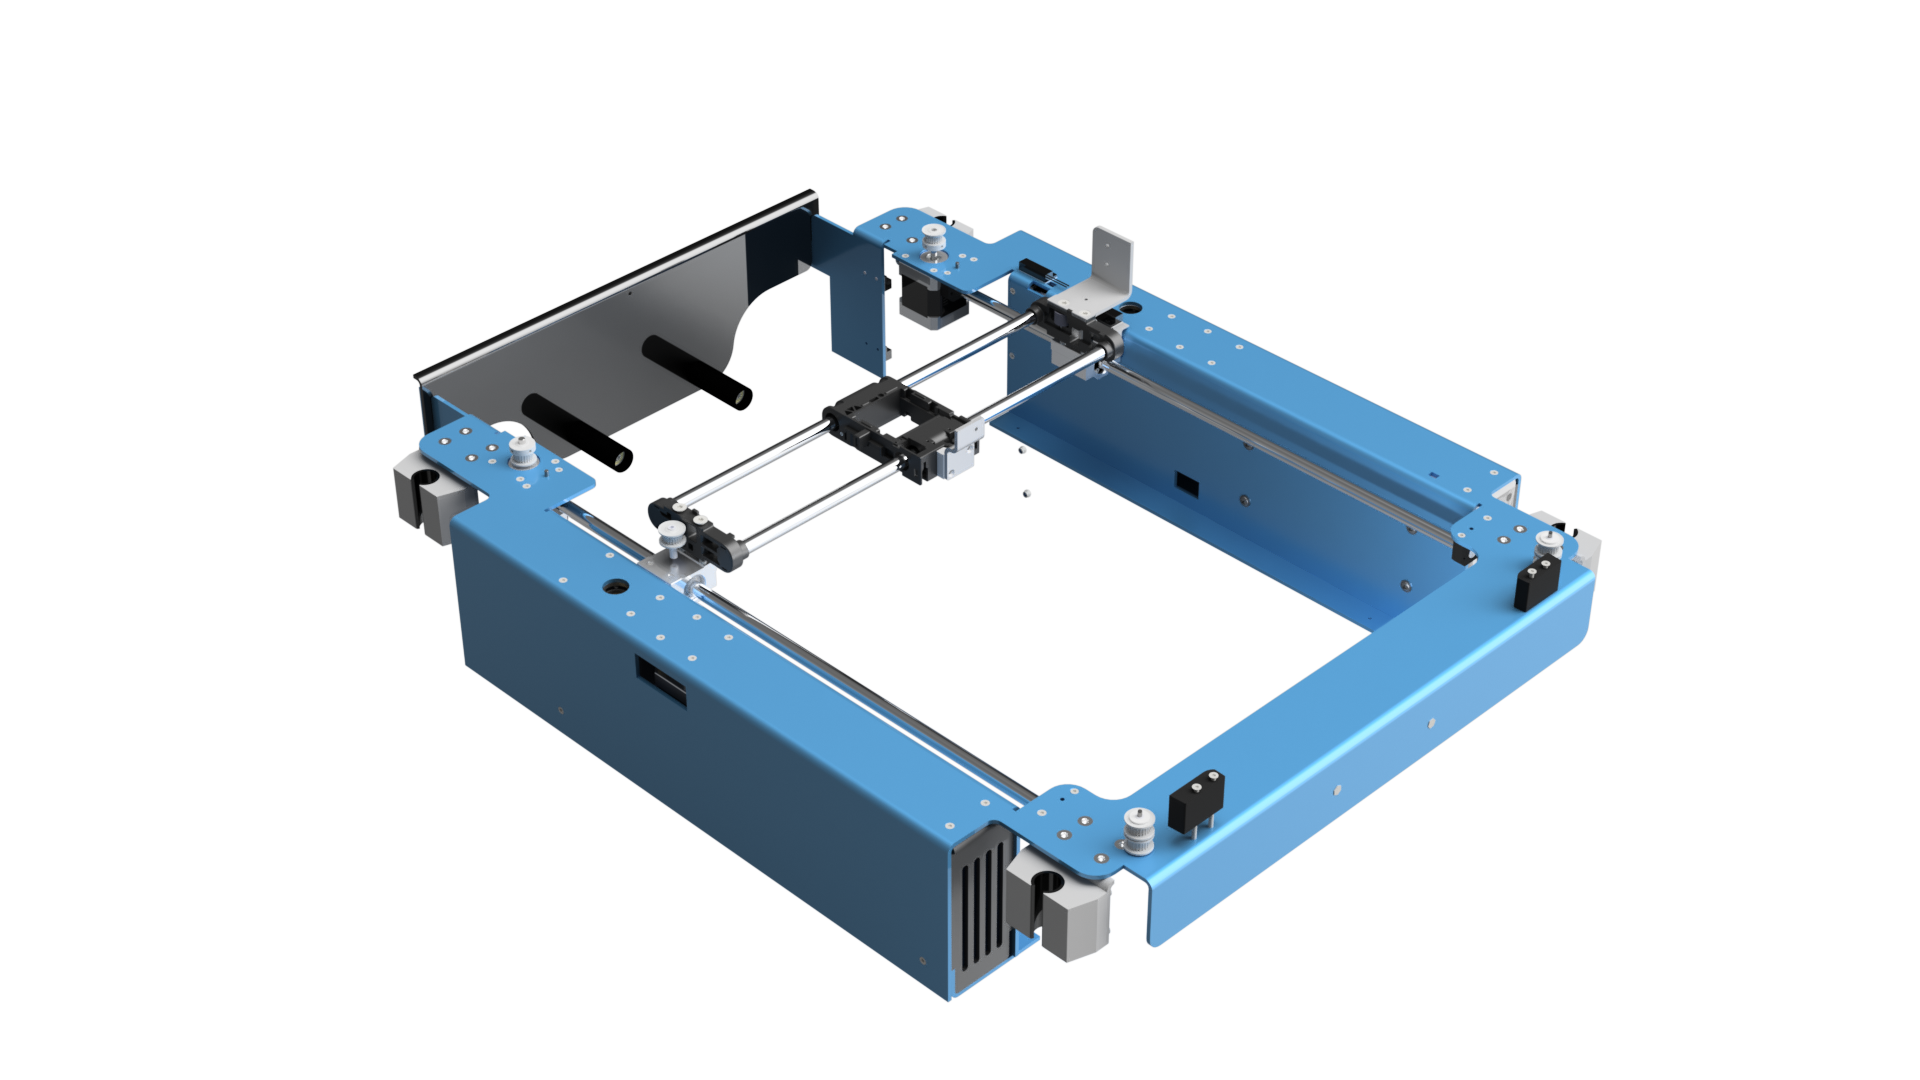 Hydra Core: a 3-Axis Gantry that can print on multiple surfaces.